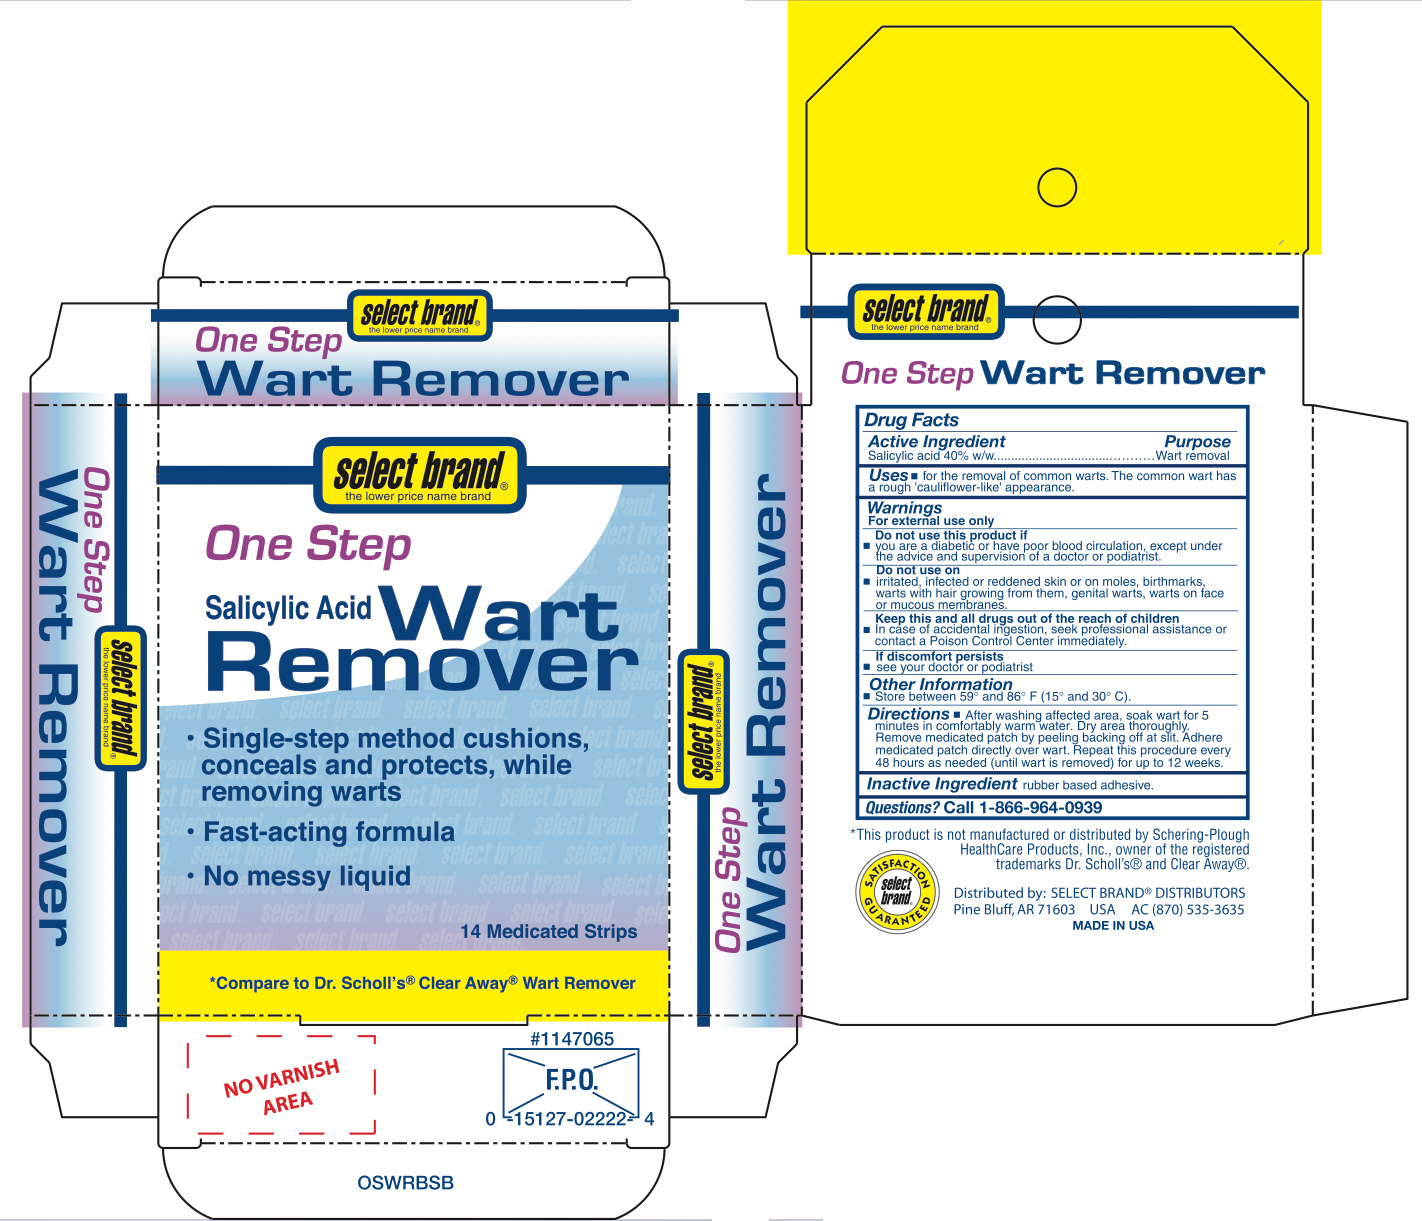 One Step Wart Remover